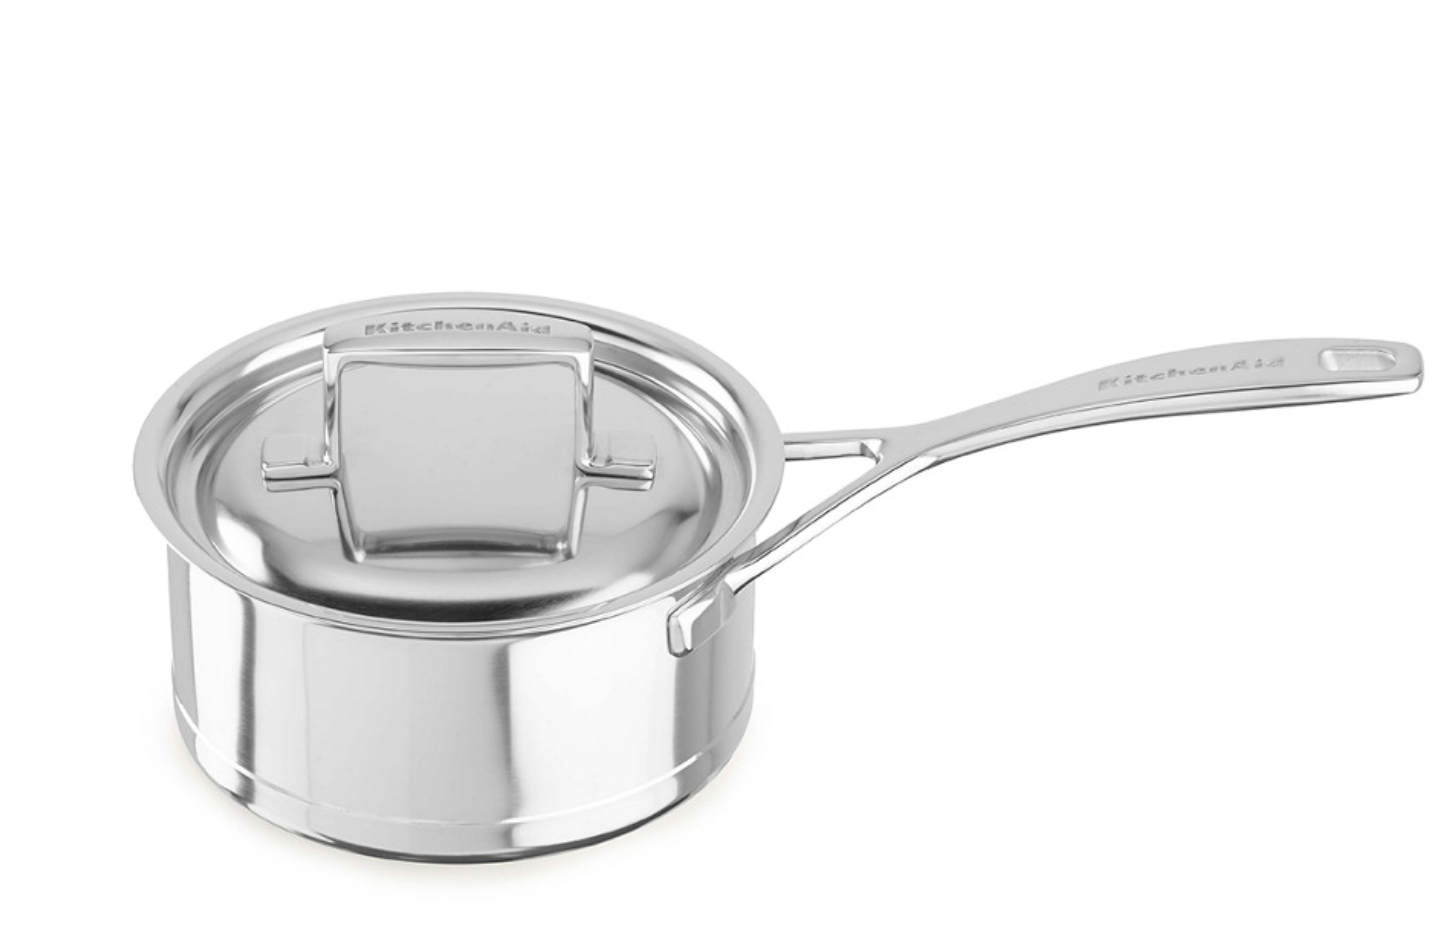 Gilt: KitchenAid Professional Cookware for 70% off.